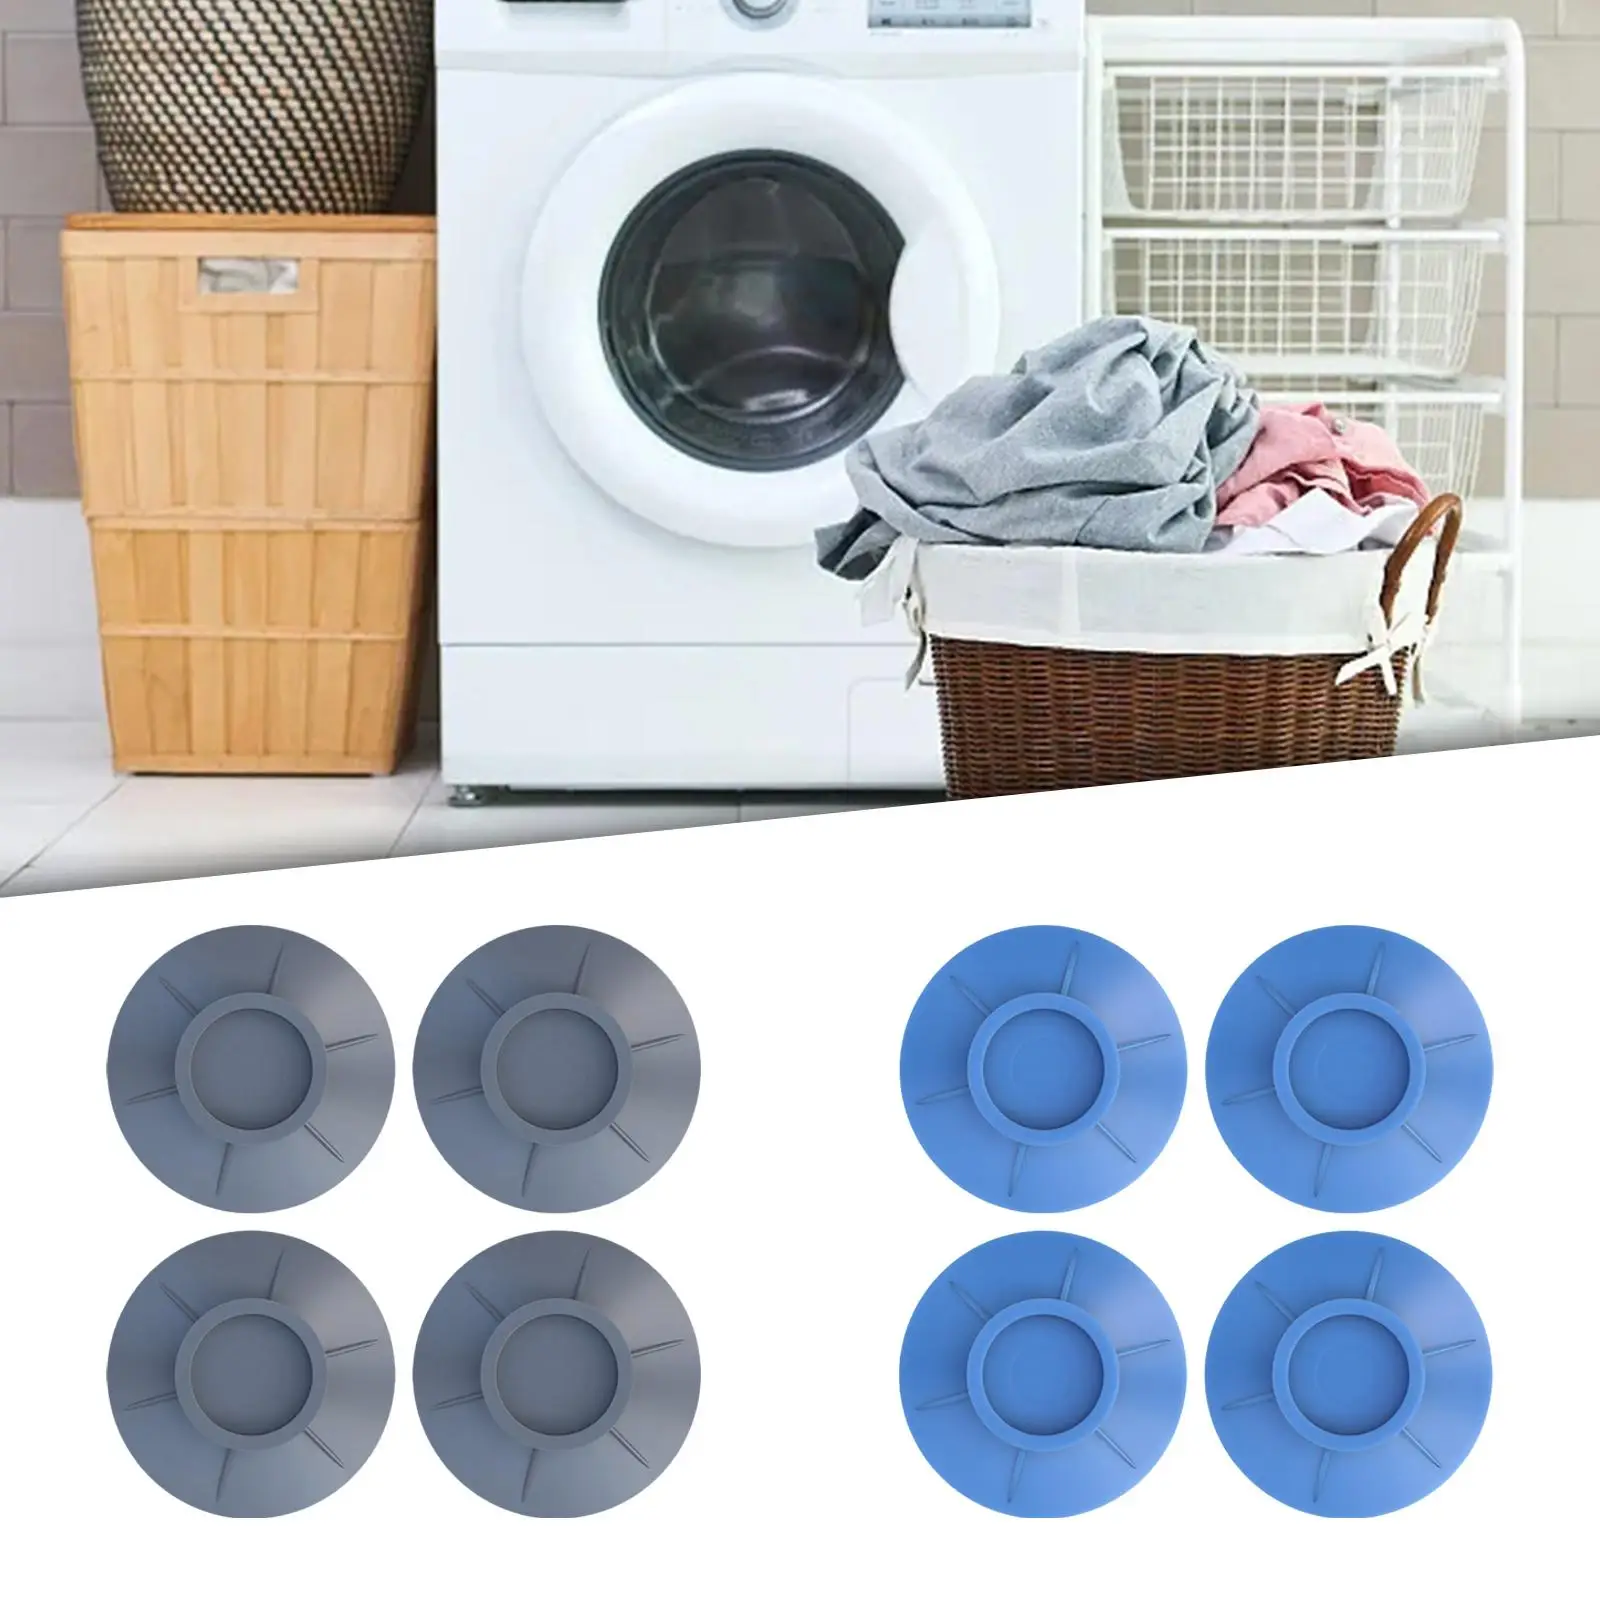 4 Pieces Washing Machine Floor Mat Shockproof for Home Furniture Appliances